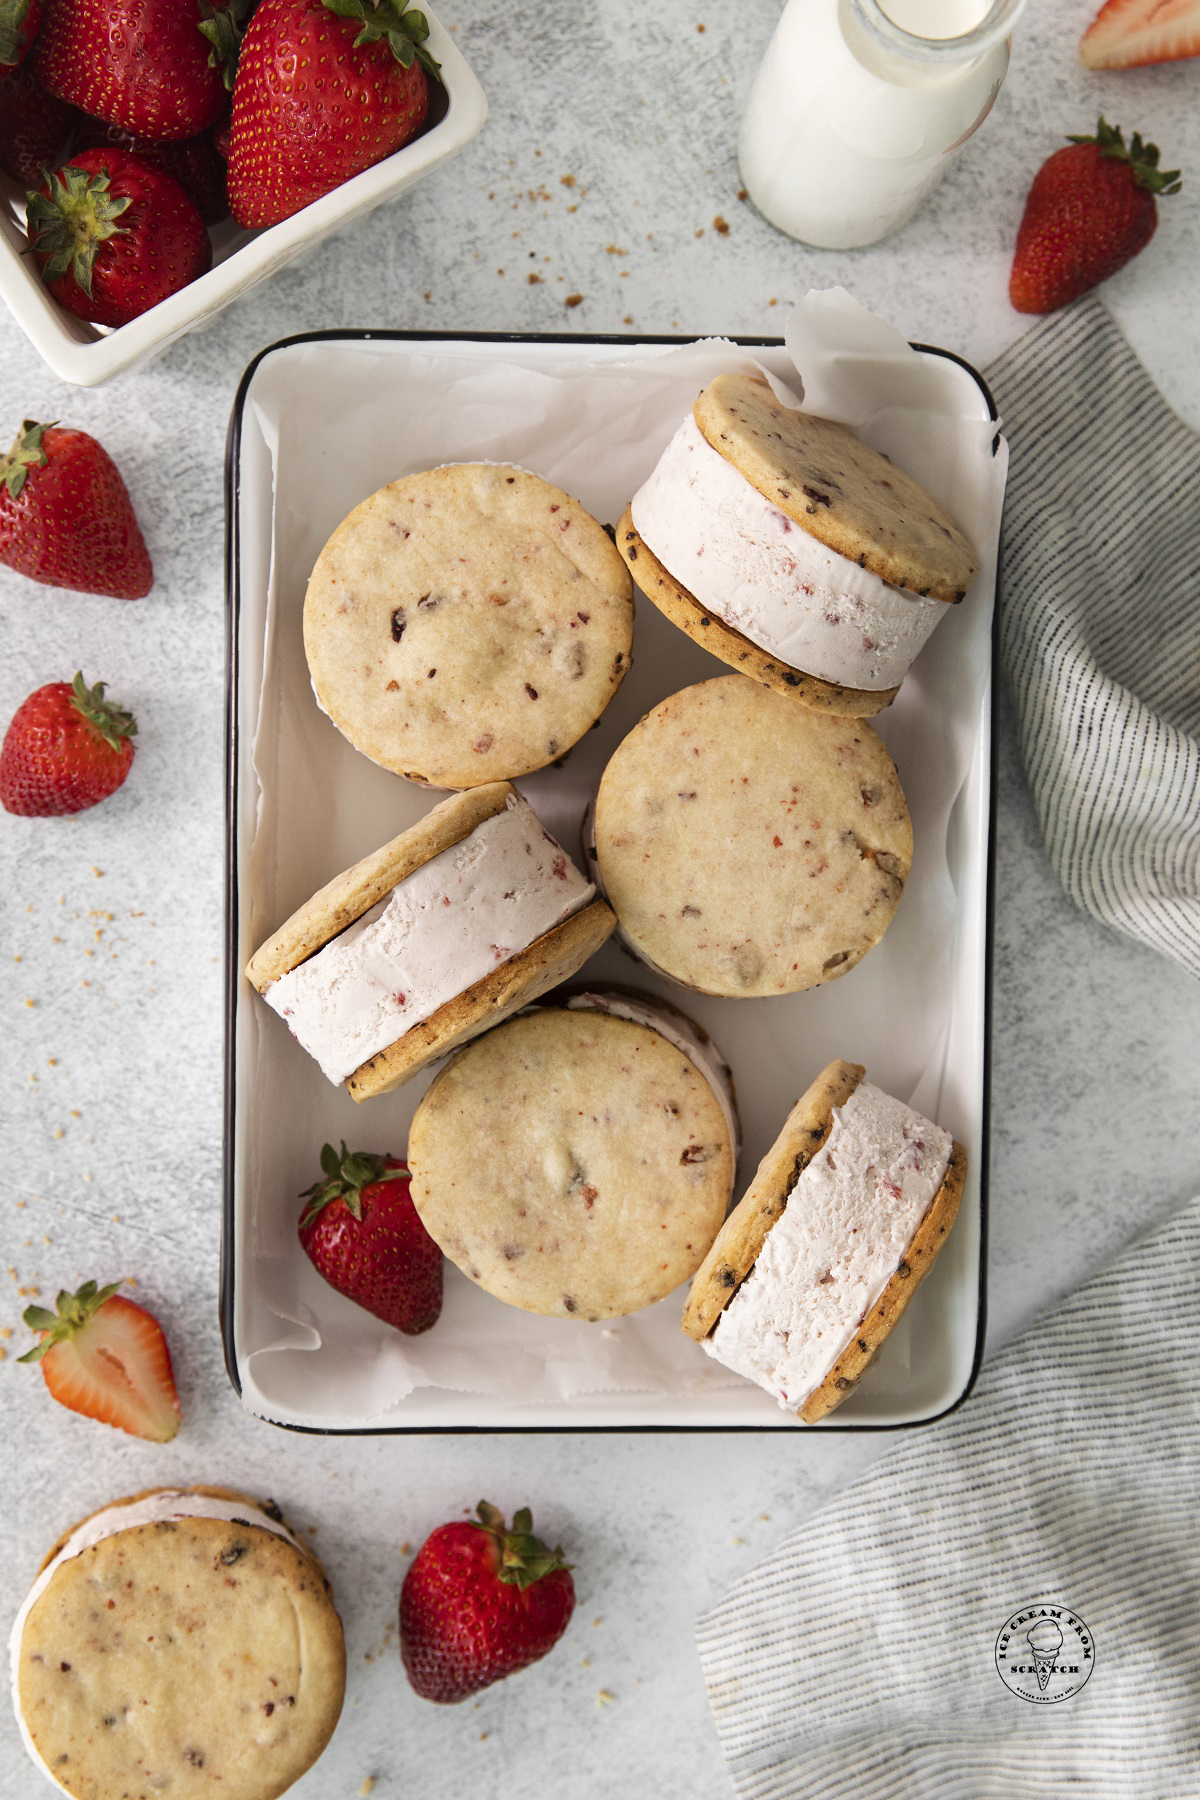 a baking dish holding six strawberry ice cream sandwiches made with strawberry shortbread cookies.